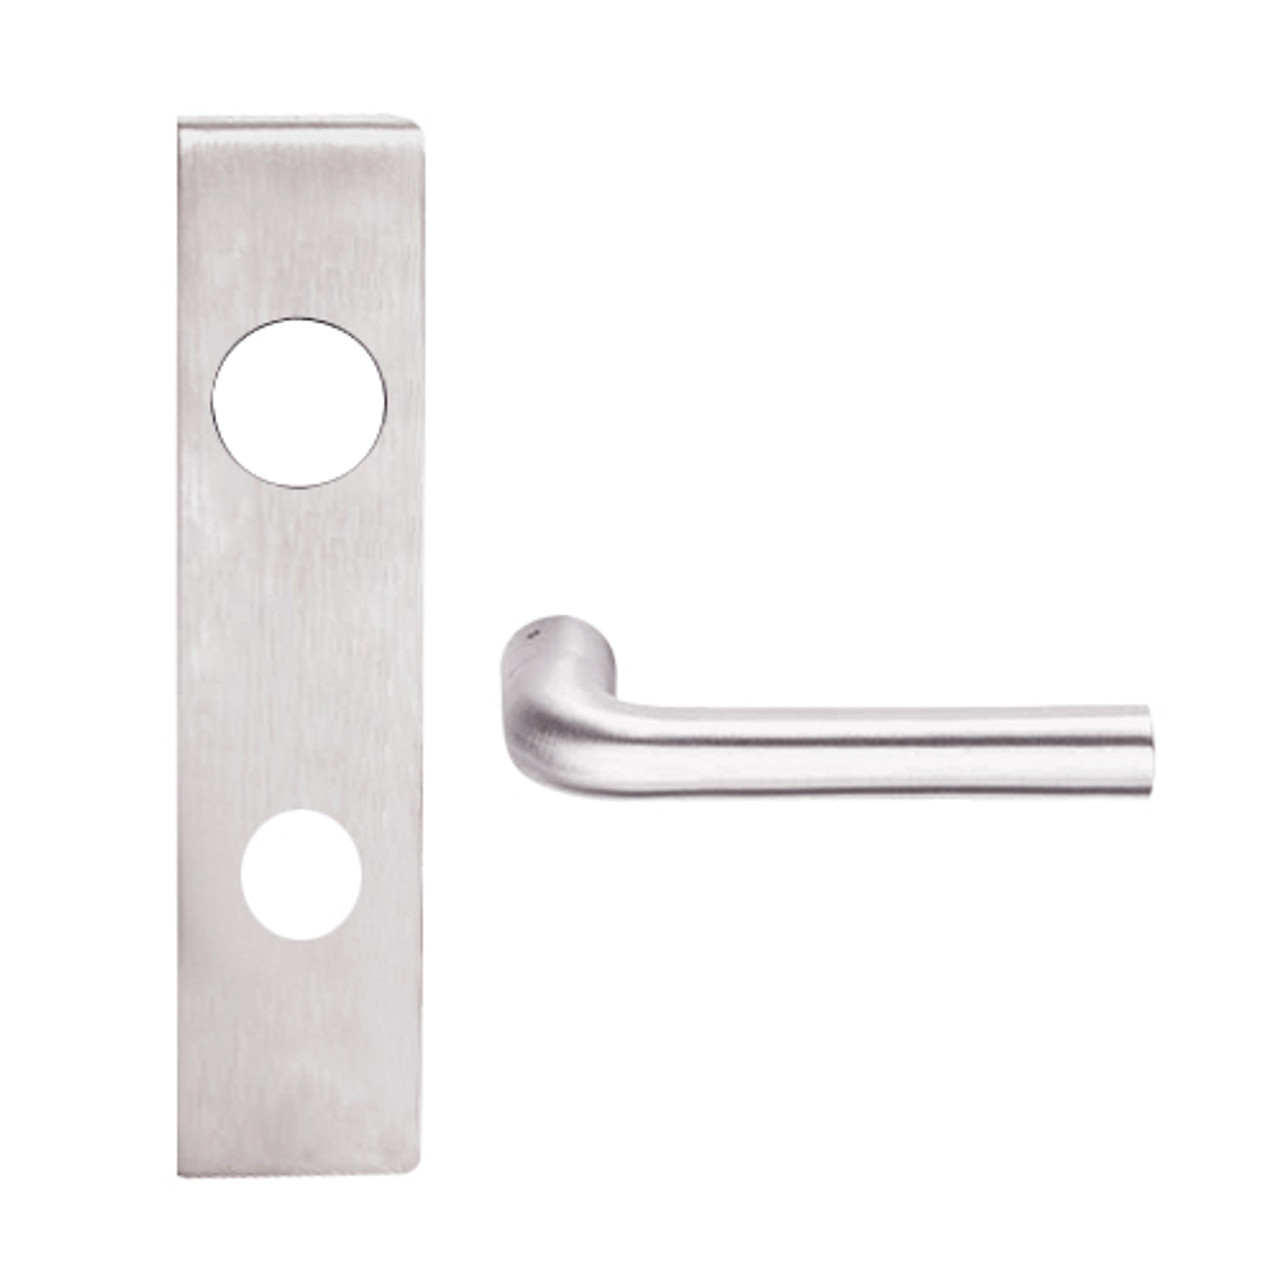 L9456BD-02L-629 Schlage L Series Corridor with Deadbolt Commercial Mortise Lock with 02 Cast Lever Design Prepped for SFIC in Bright Stainless Steel